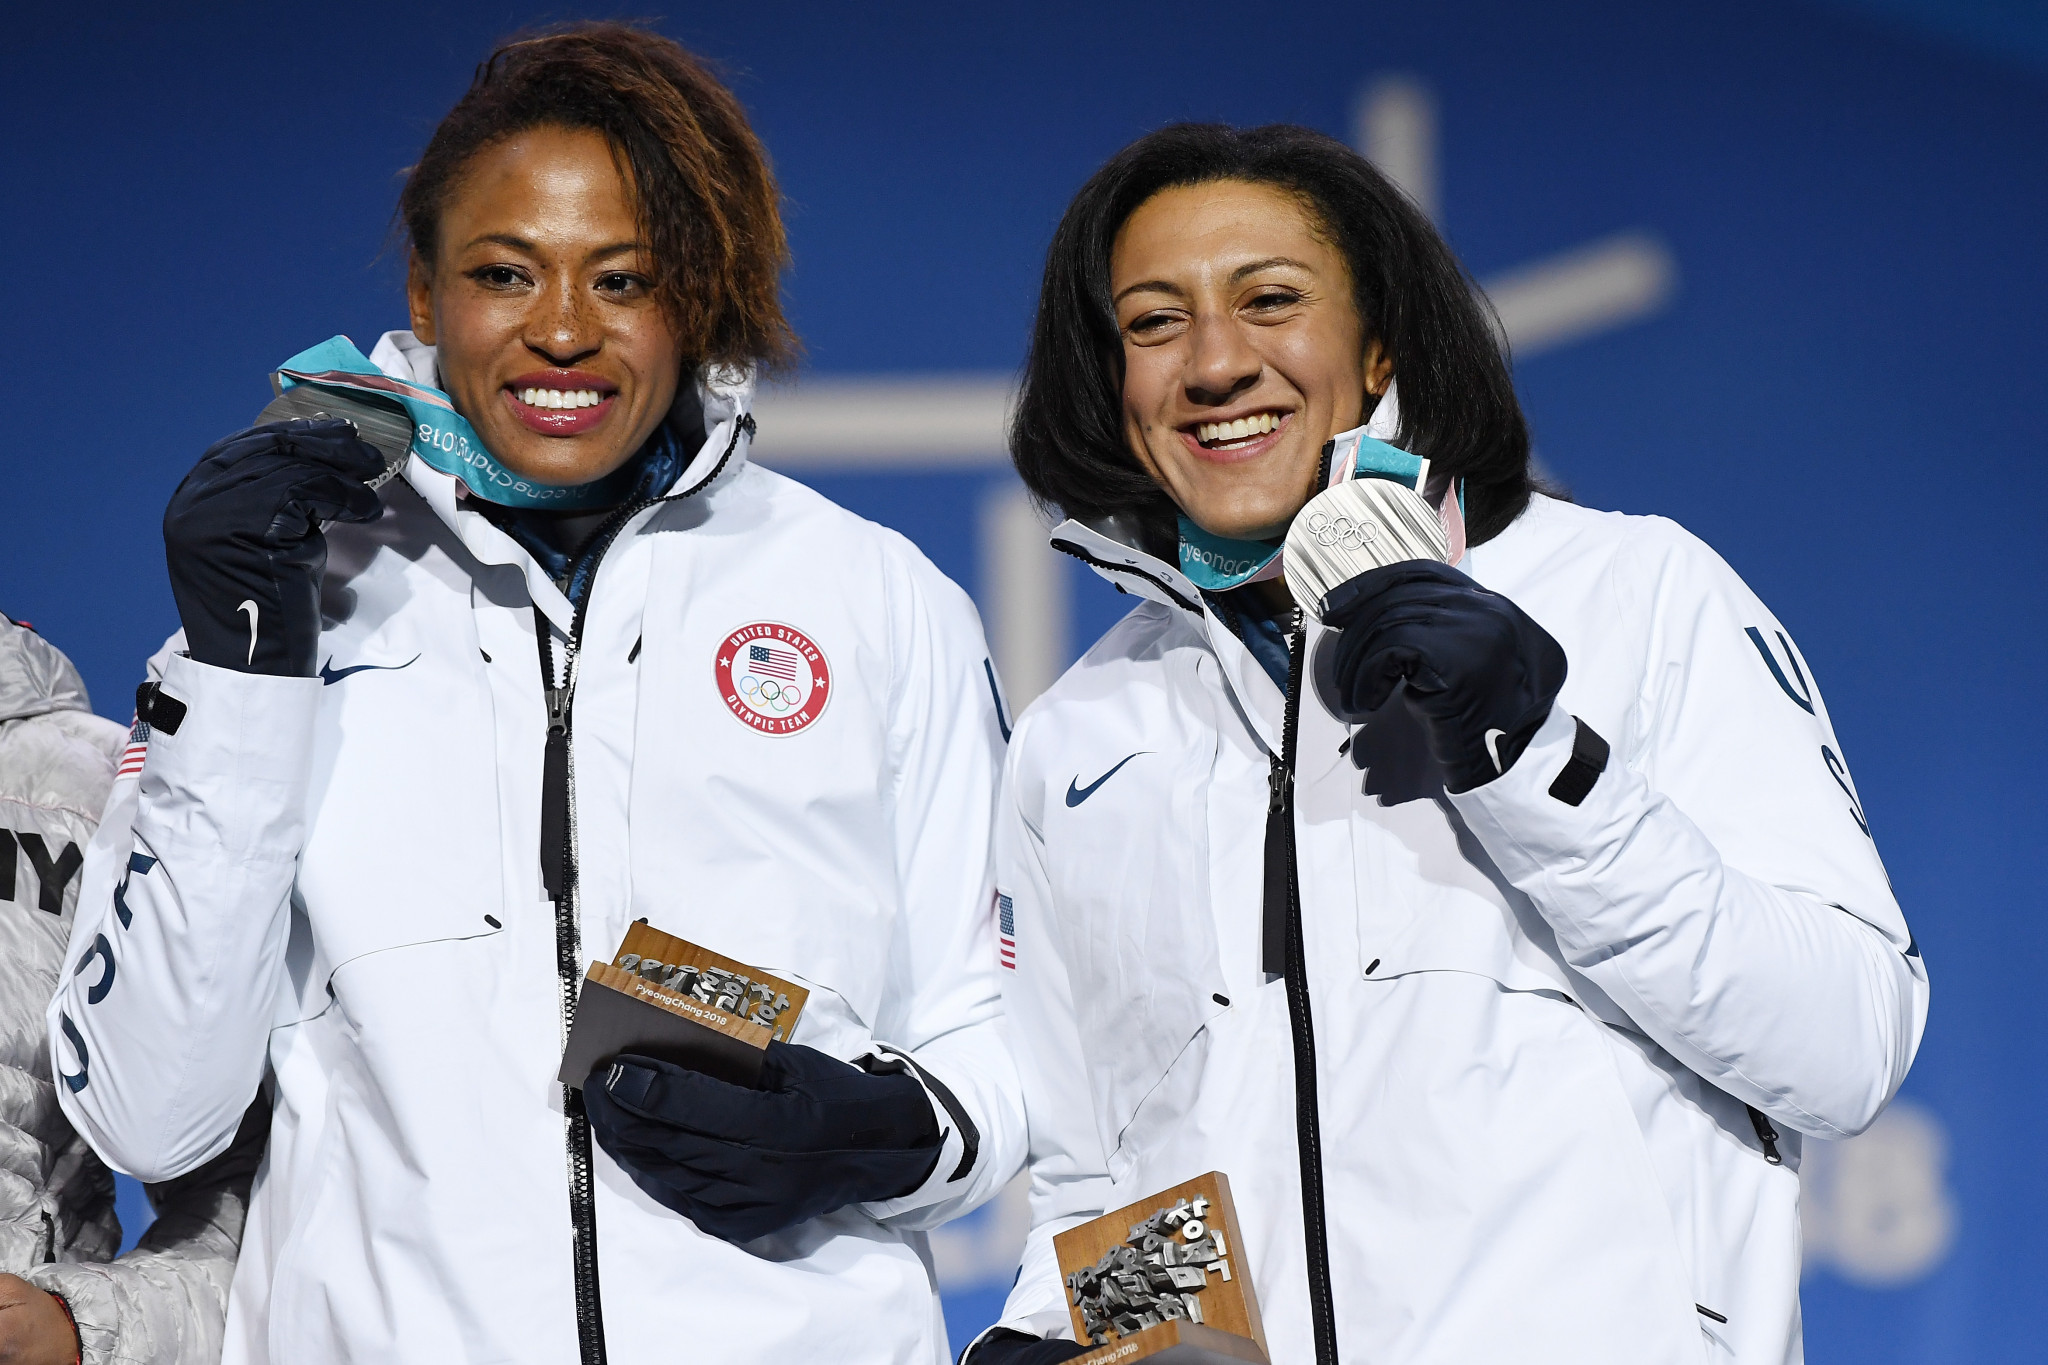 Darrin Steele oversaw teams that won nine Olympic medals, including two-woman bobsleigh silver for Elana Meyers Taylor and Lauren Gibbs at Pyeongchang 2018 ©Getty Images